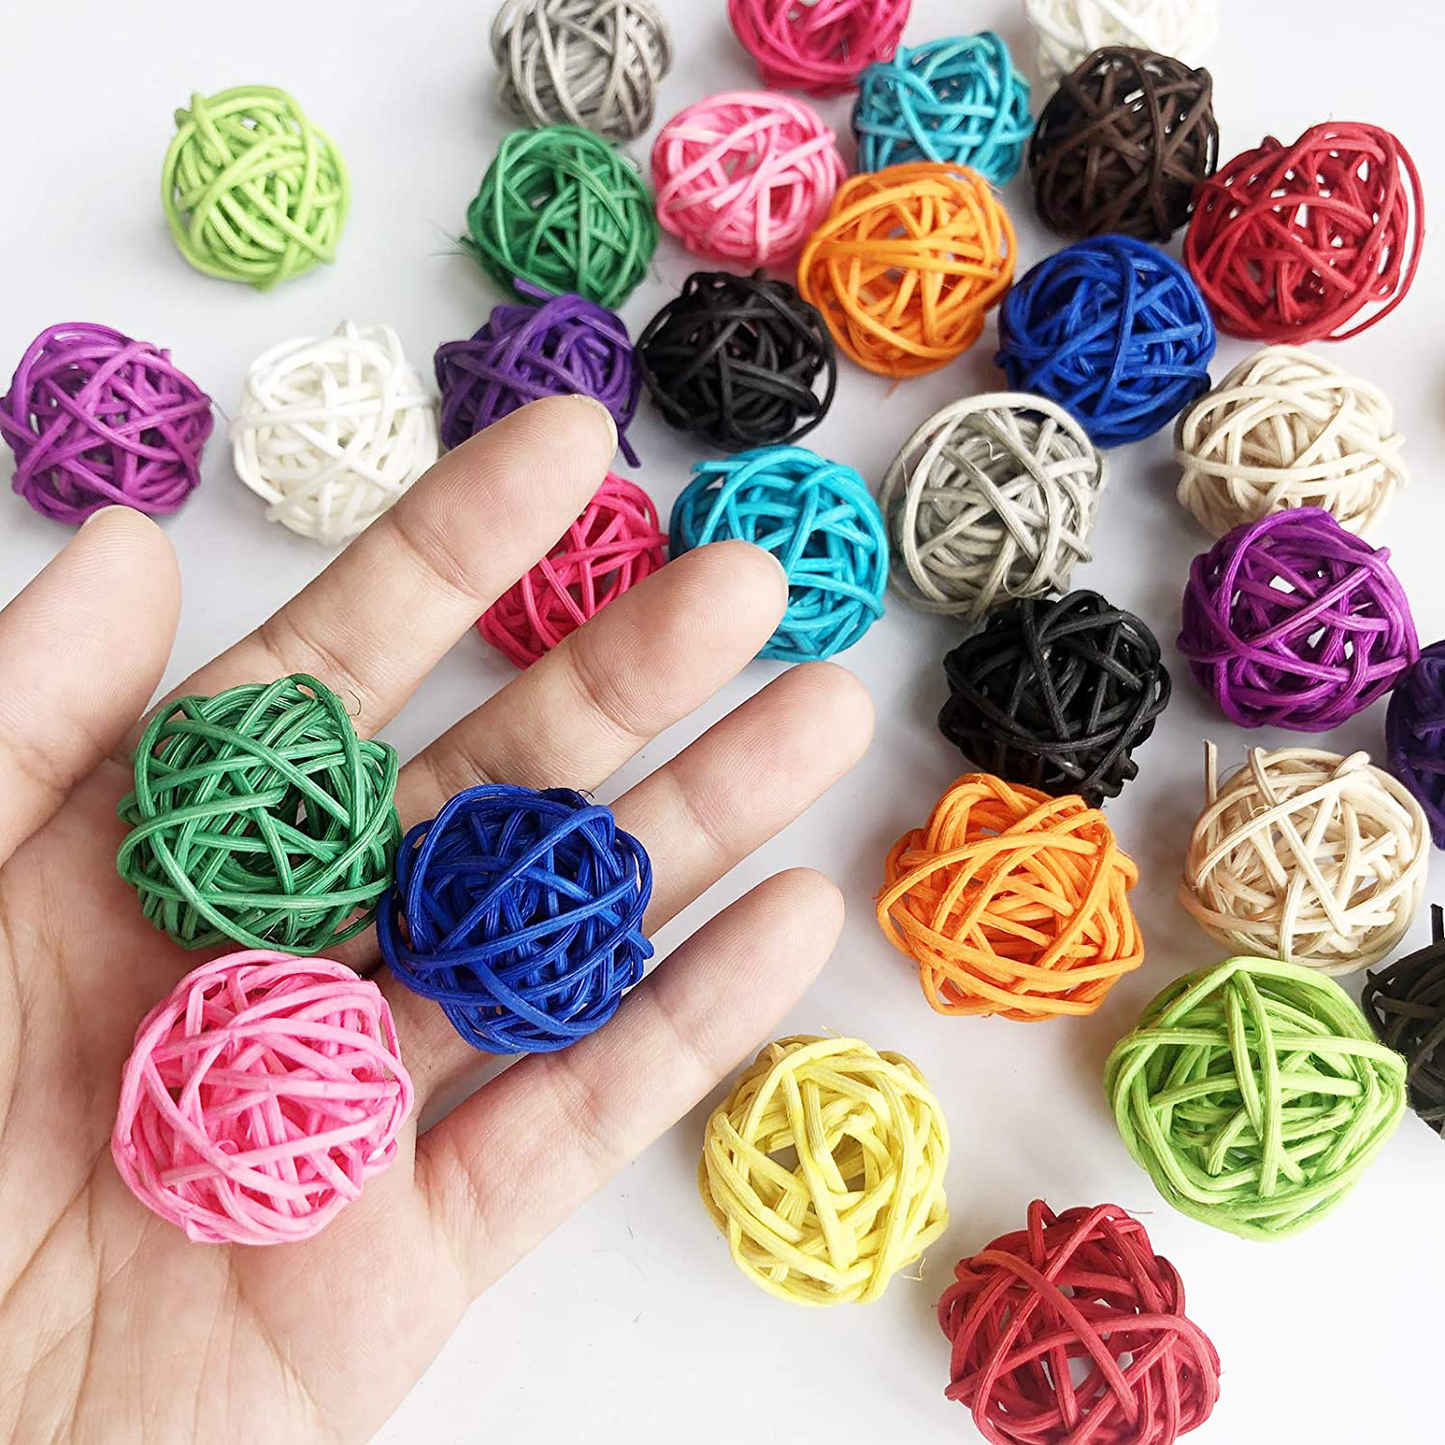 Benvo Rattan Balls 32 Pack 1.2 Inch Wicker Ball Birds Toy Quaker Parrot Parakeet Chewing Toys Pet Bite Toys for Budgies Conures Hamsters Ball Orbs Crafts DIY Accessories Vase Fillers (Multi-Colored) Animals & Pet Supplies > Pet Supplies > Bird Supplies > Bird Toys Benvo   